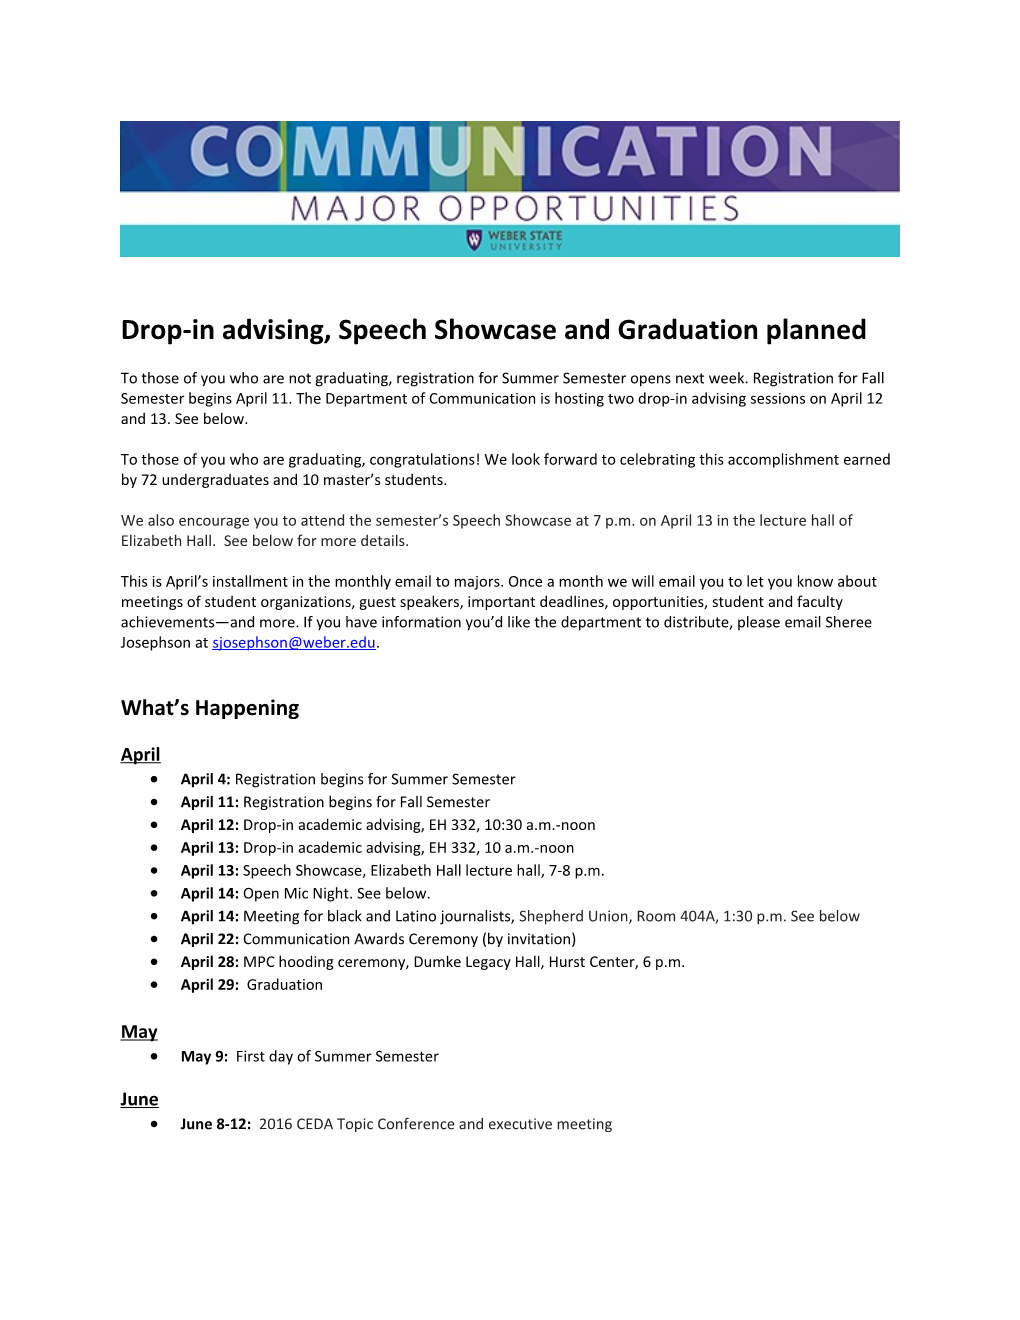 Drop-In Advising, Speech Showcase and Graduation Planned